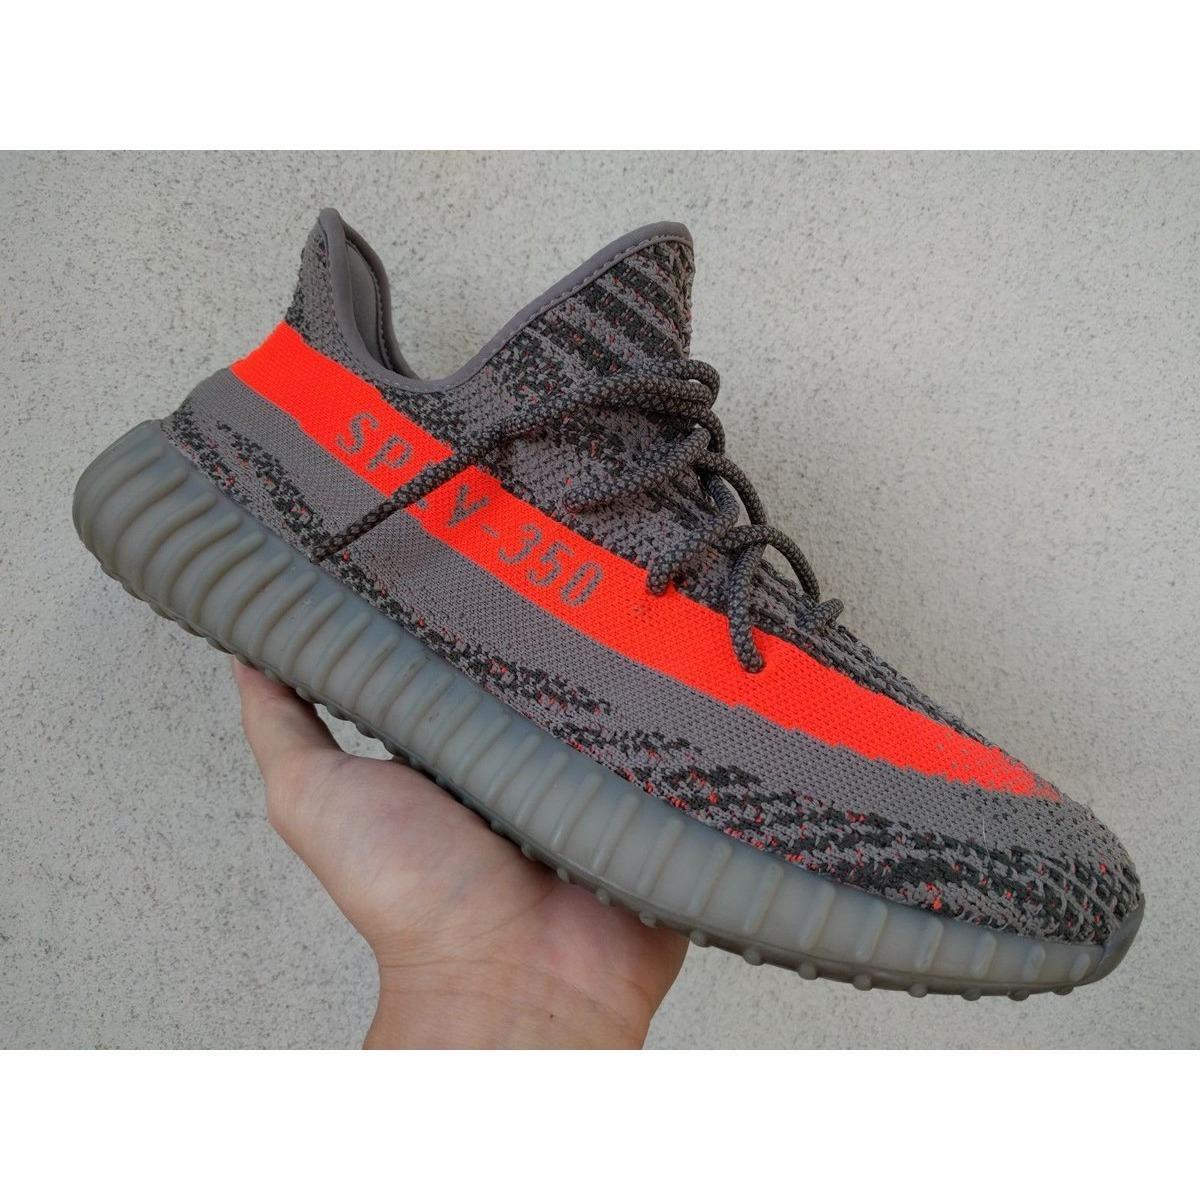 yeezy boost price in the philippines